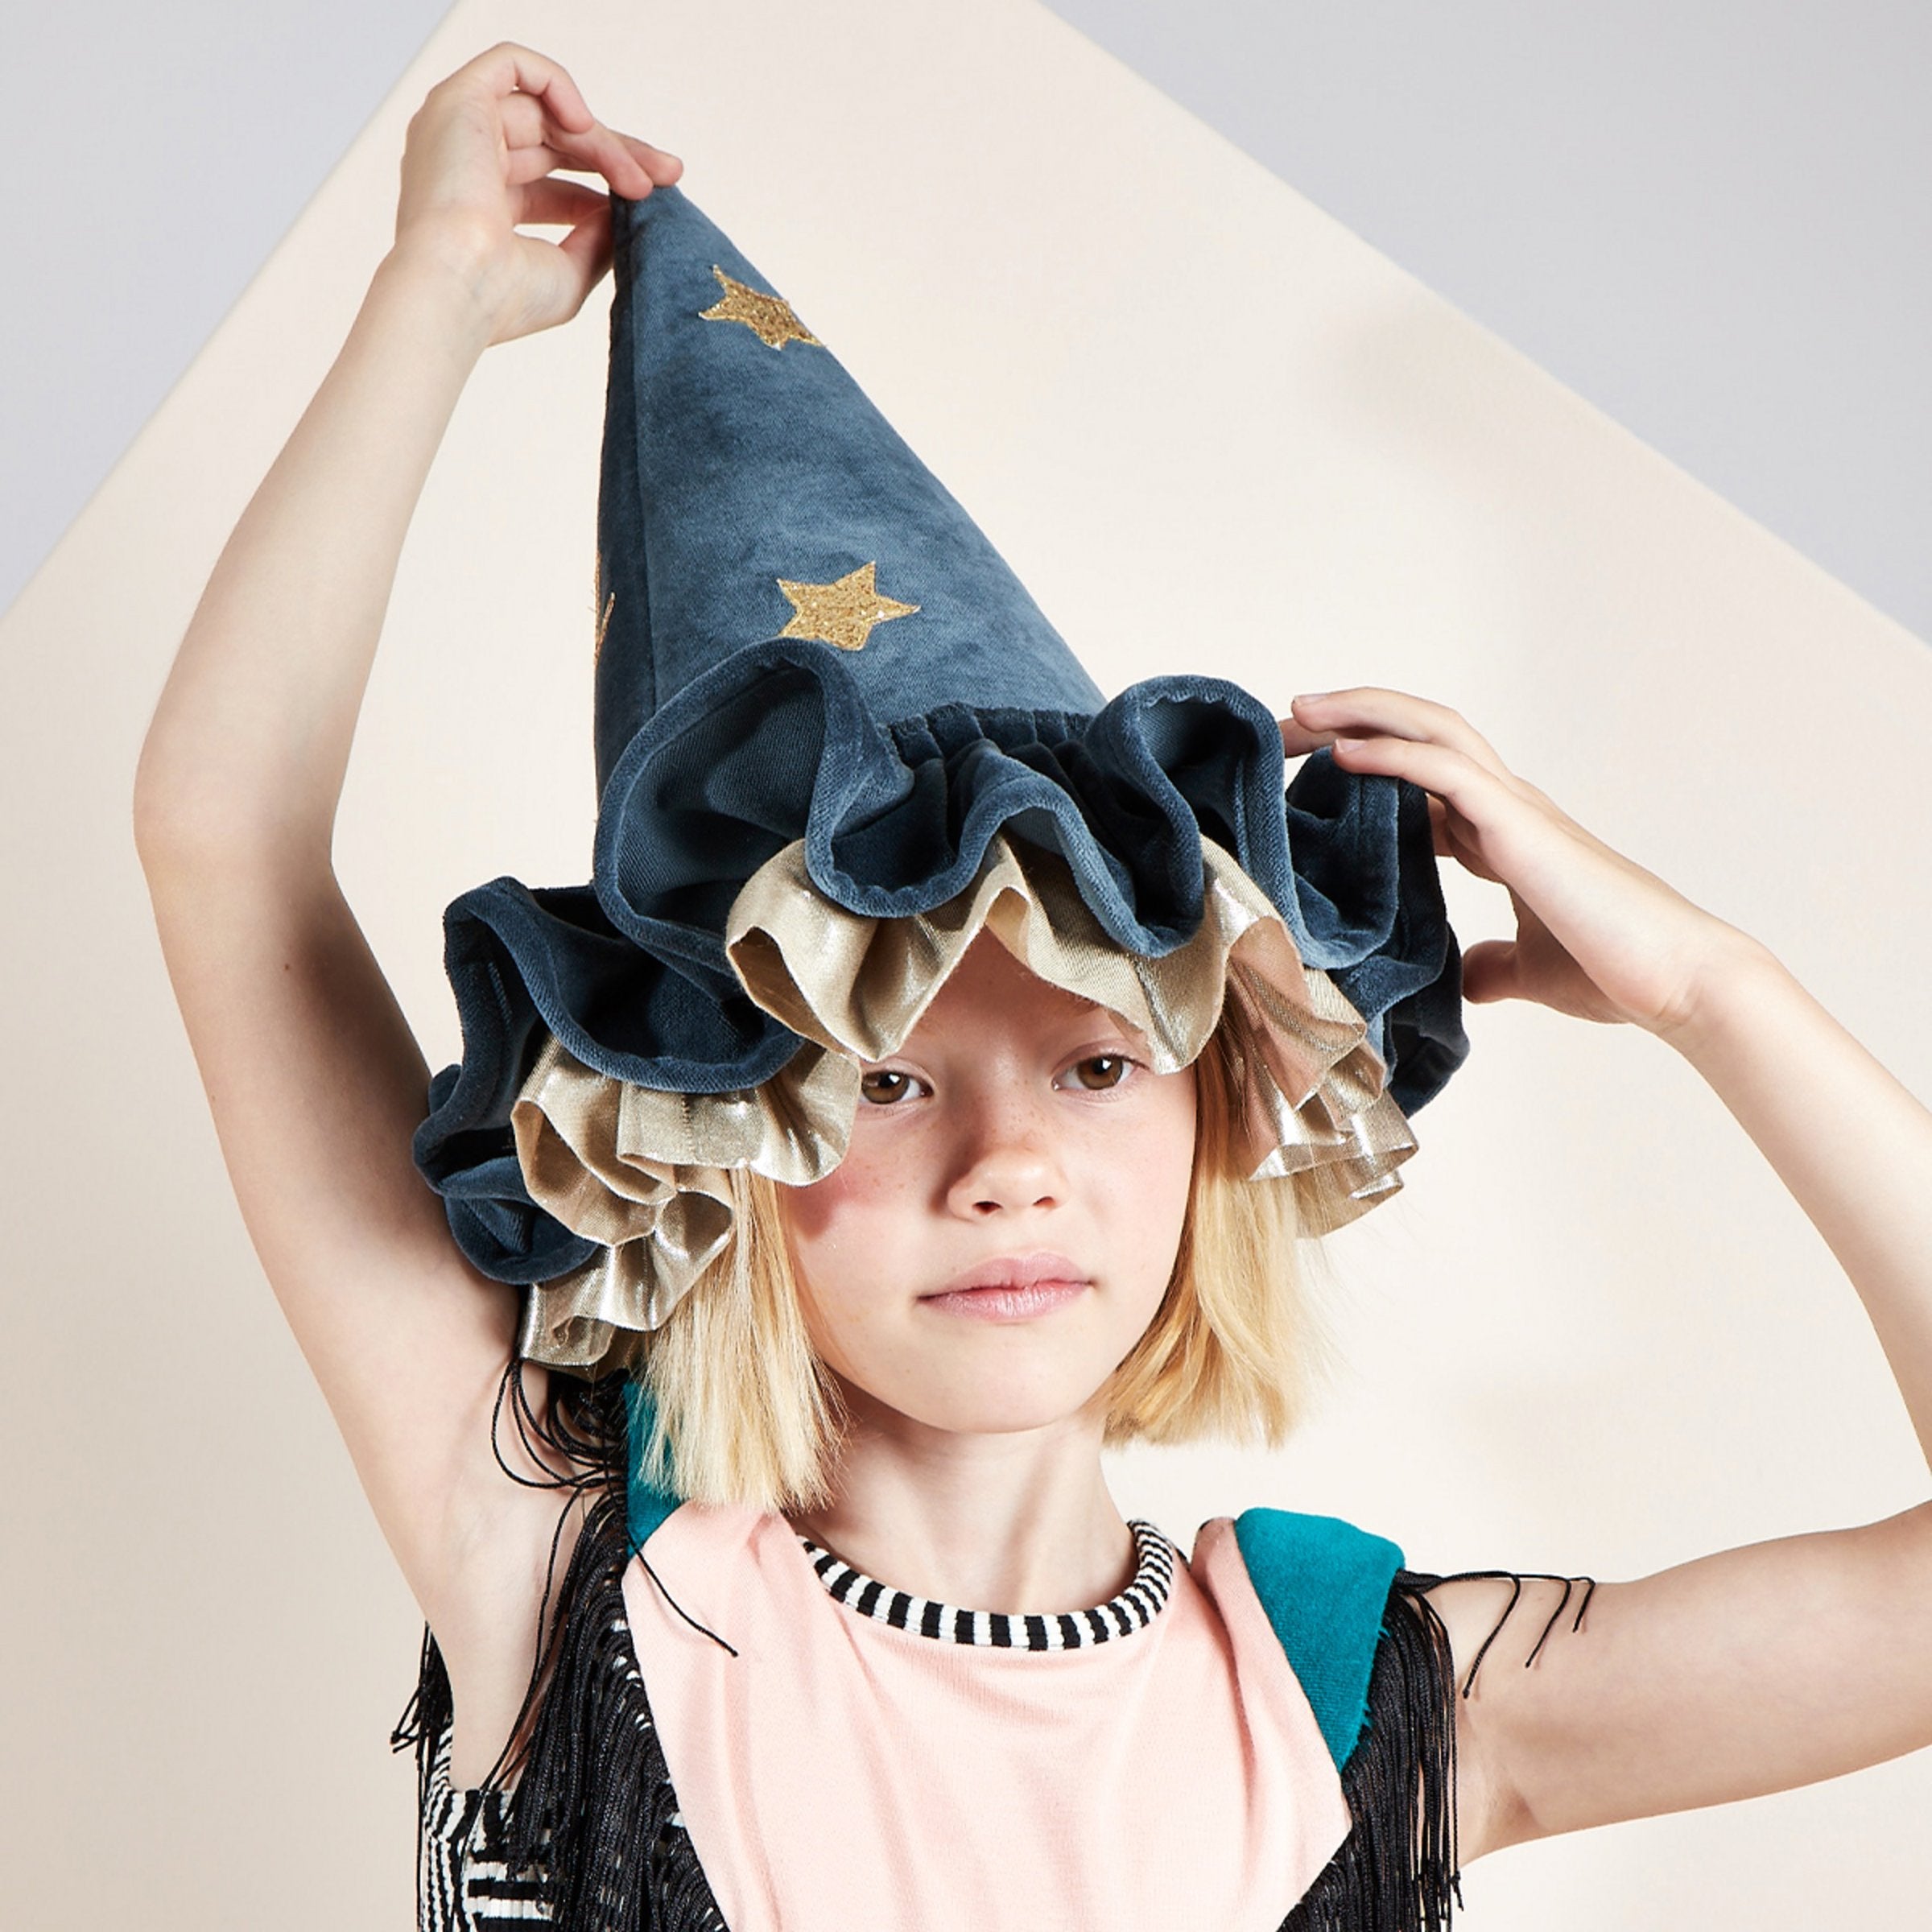 Our pointed hat, crafted from blue velvet, is ideal to add to a witch costume or to wear for dressing up all year.